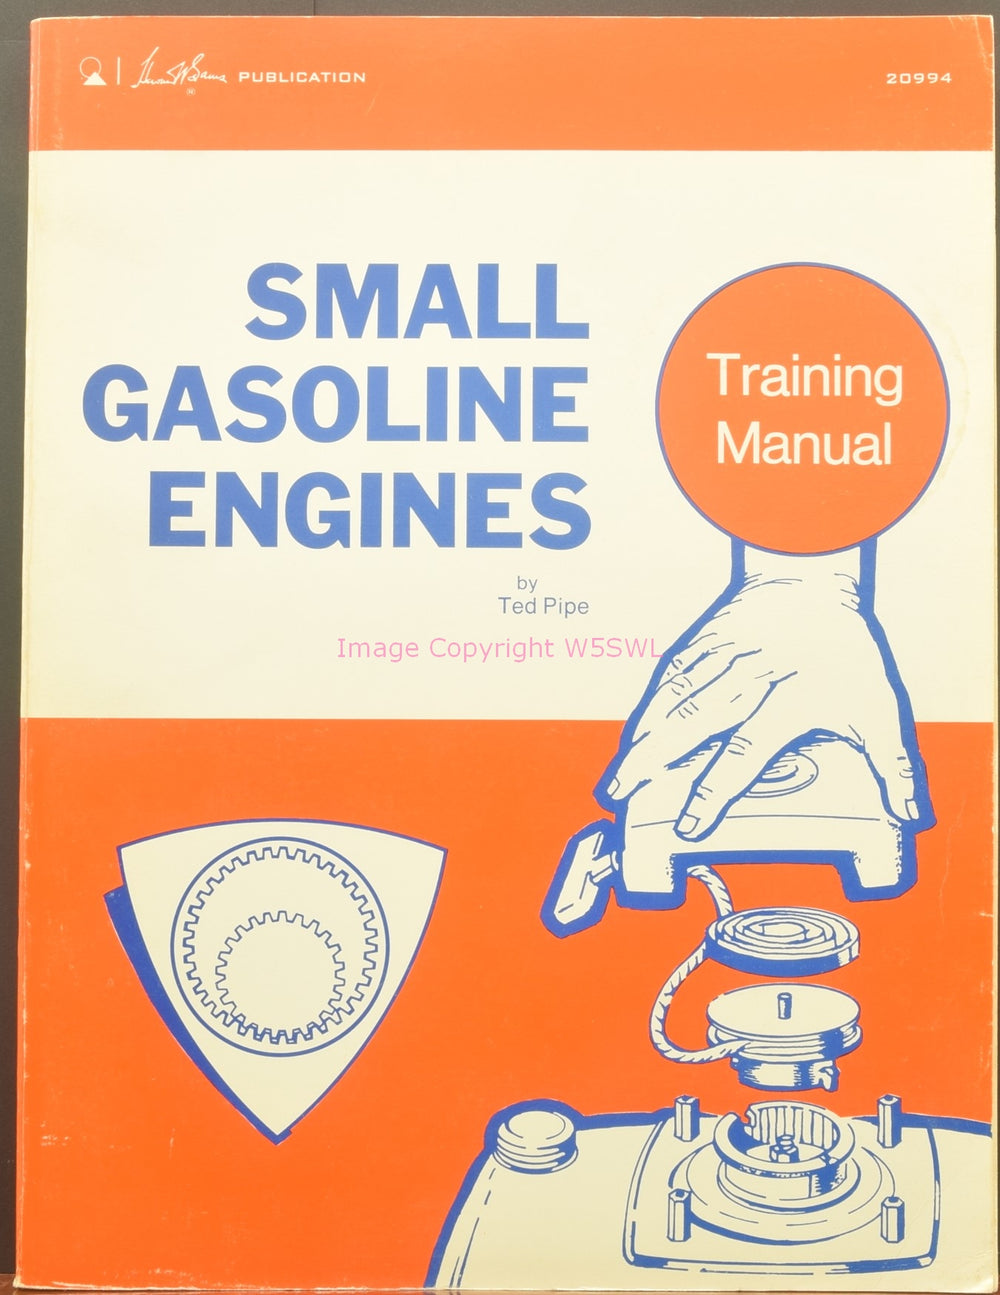 Small Gasoline Engines Training Manual by Ted Pipe - Dave's Hobby Shop by W5SWL